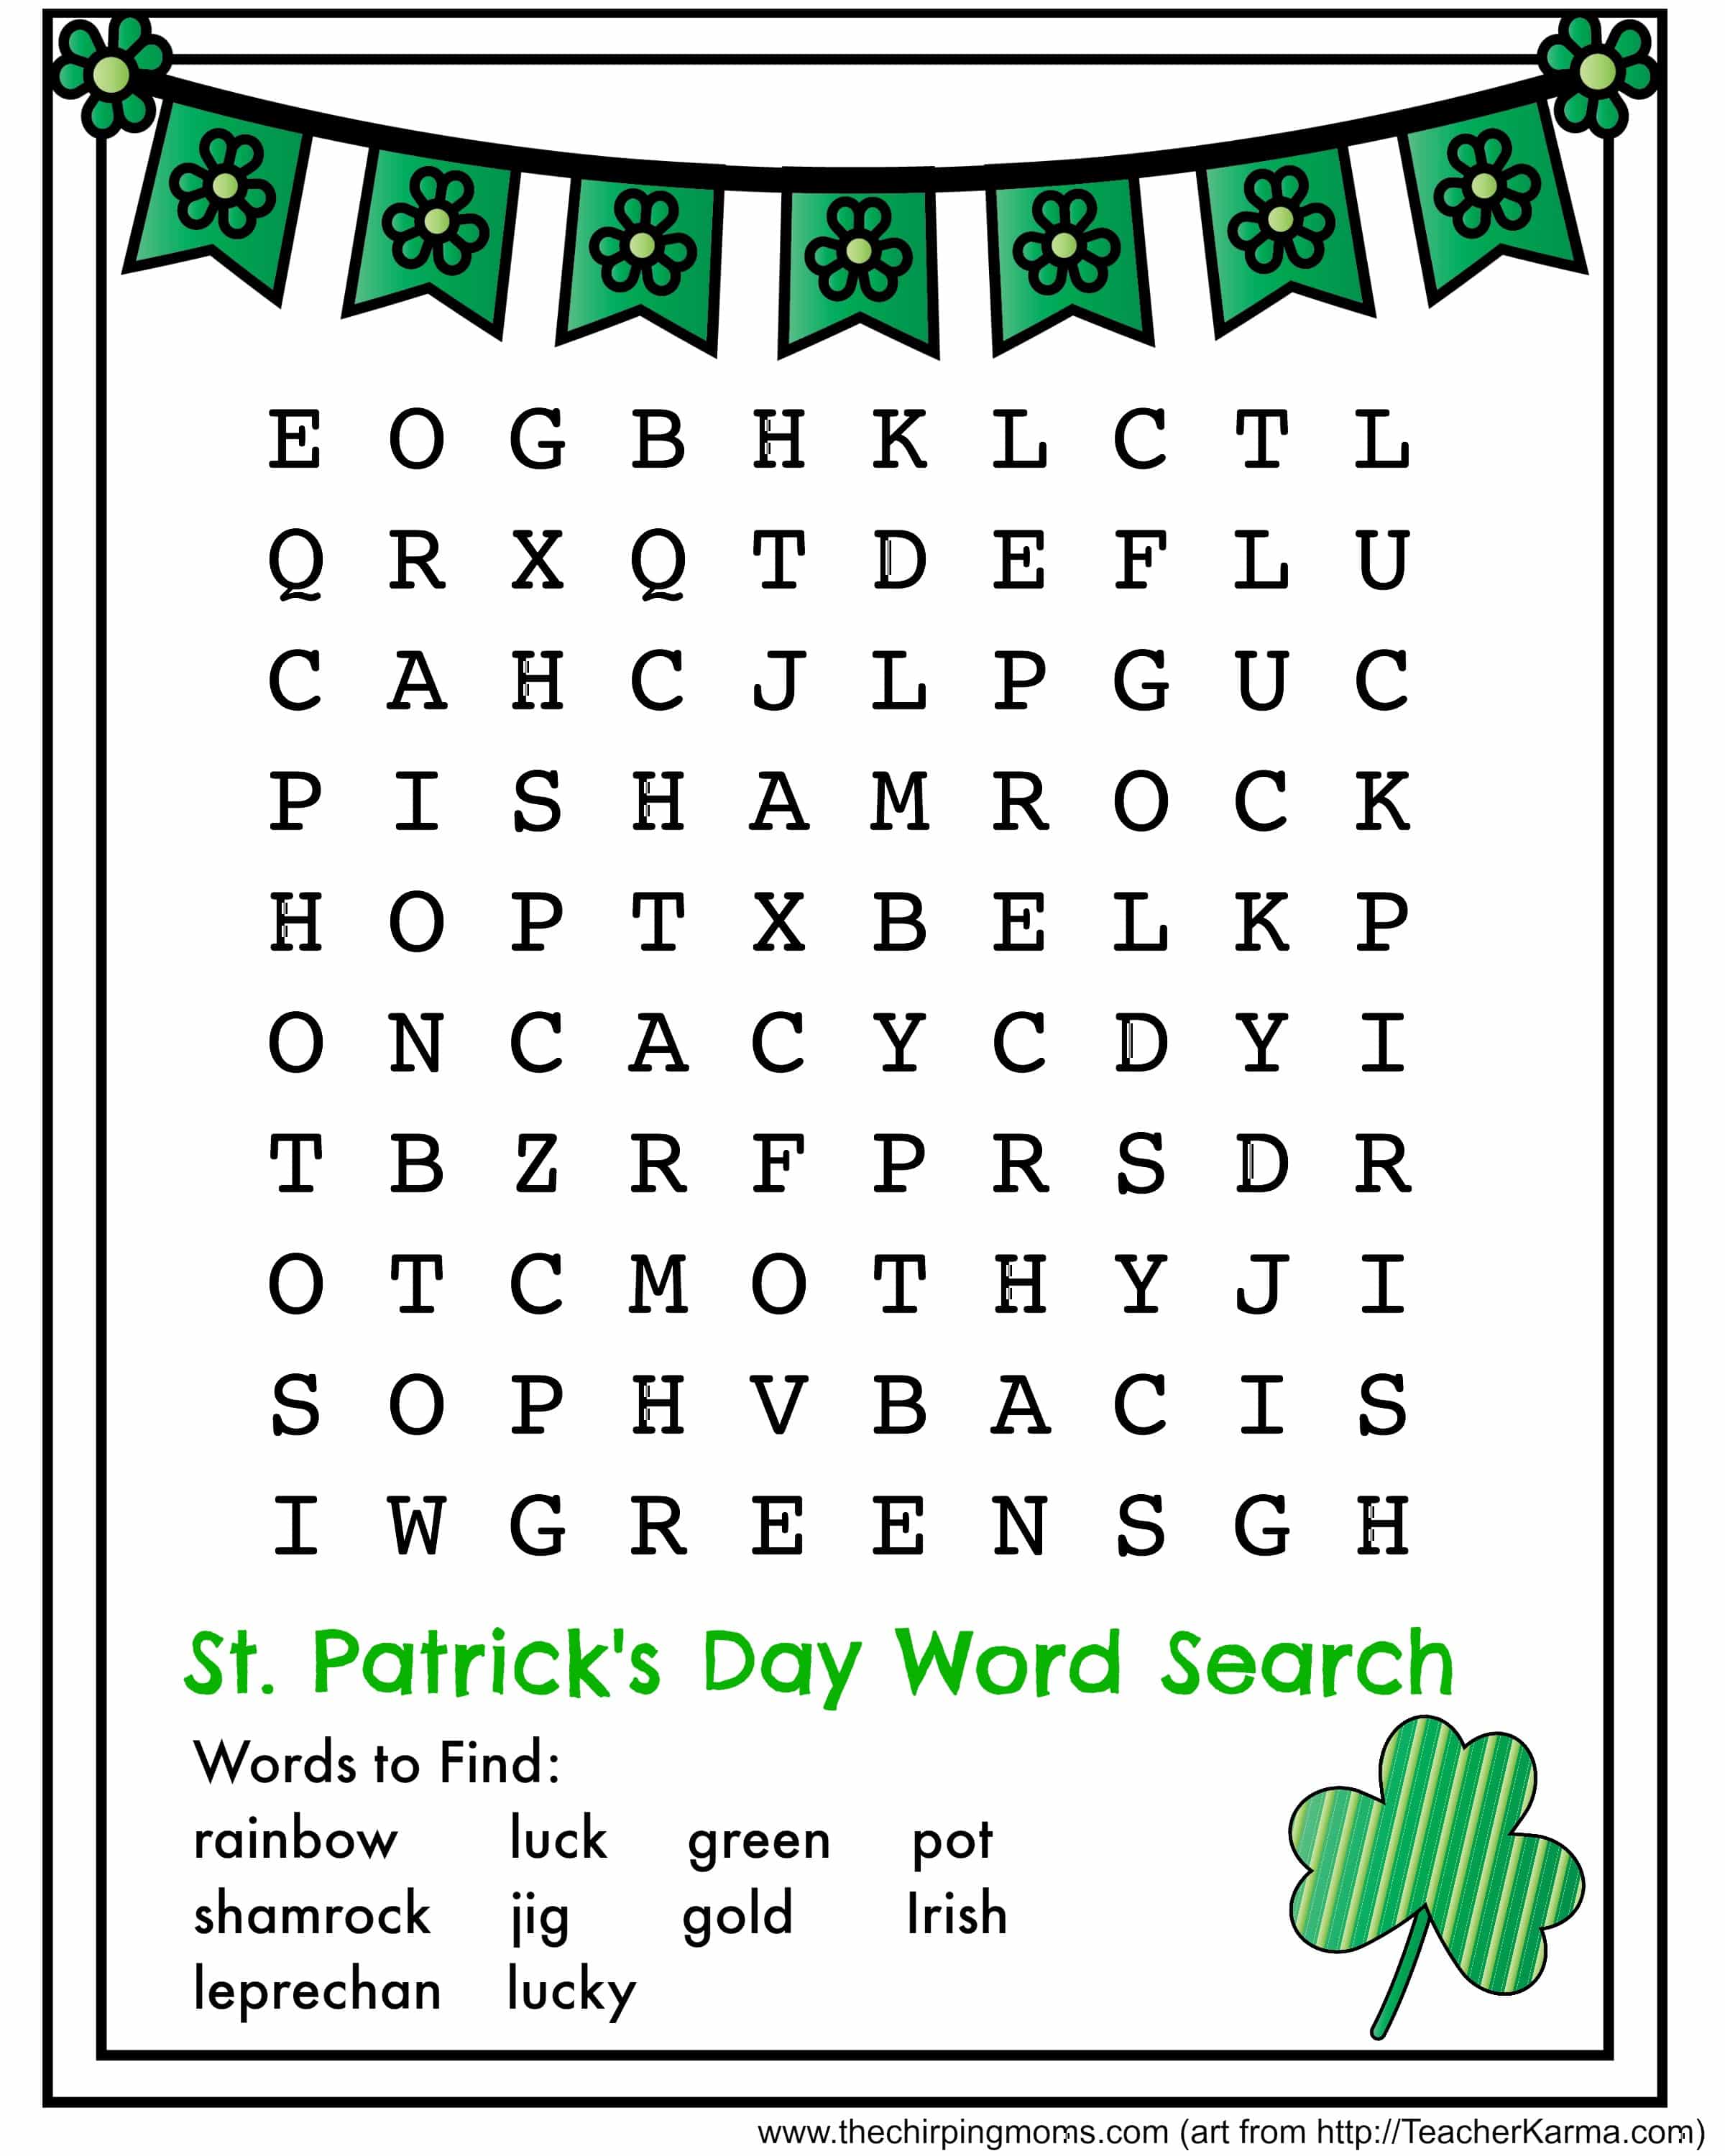 St. Patrick's Day Word Search { Free Printable } The Chirping Moms